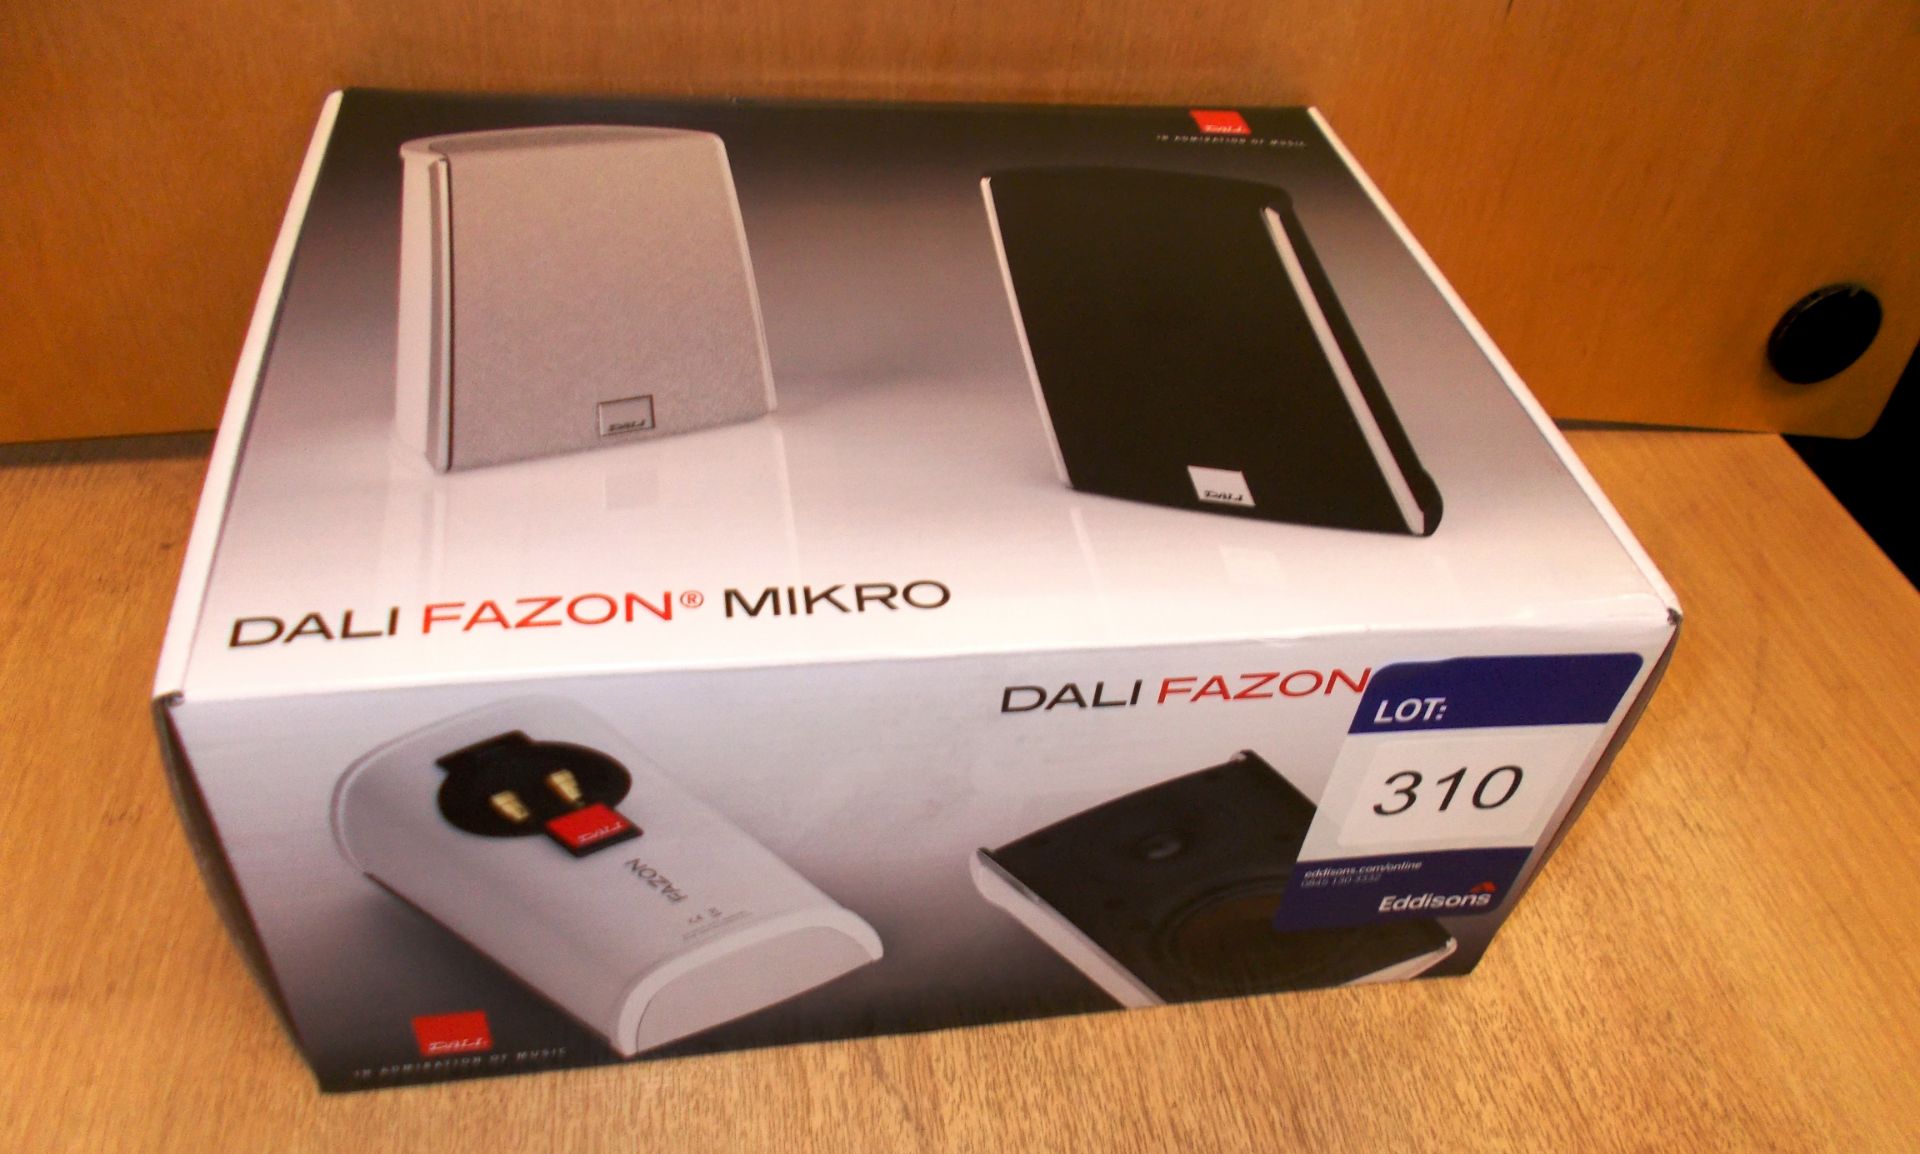 Pair of Dali Fazon Mikro White Speakers (boxed) – RRP £250 (collection Monday 29 April ONLY - please